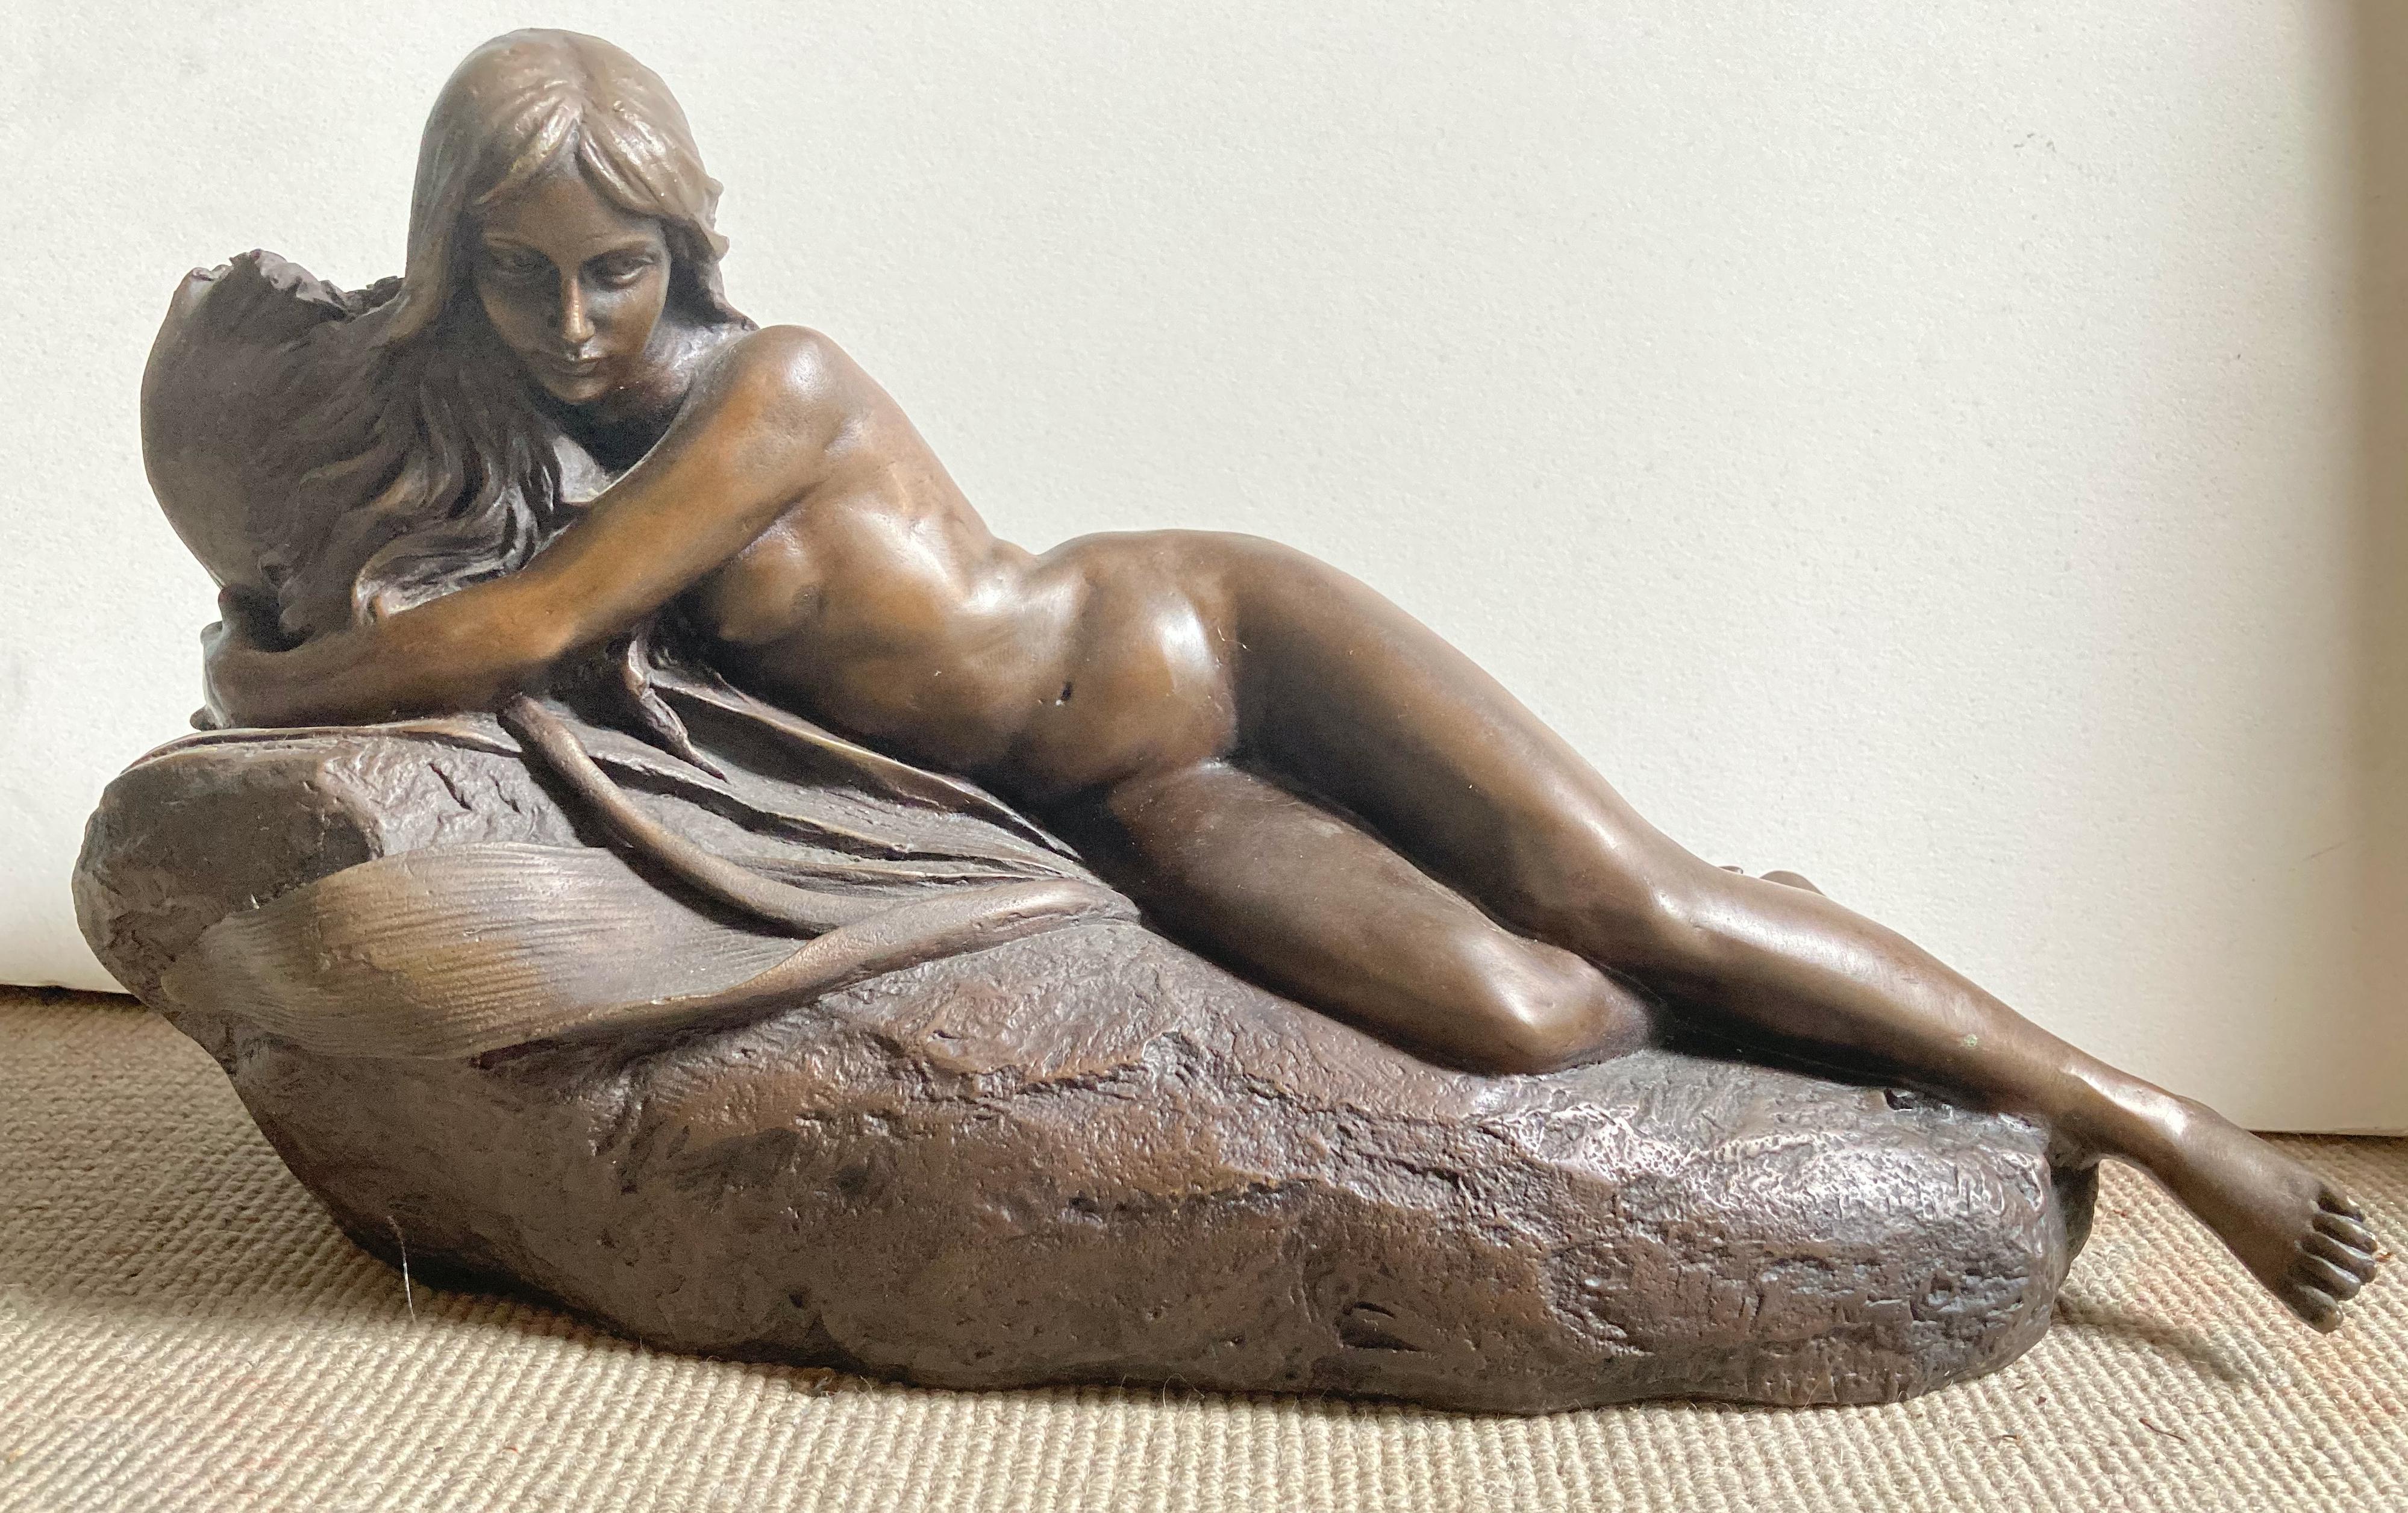 Exquisite 12" Bronze of Female Nude in Form of Candle Holder